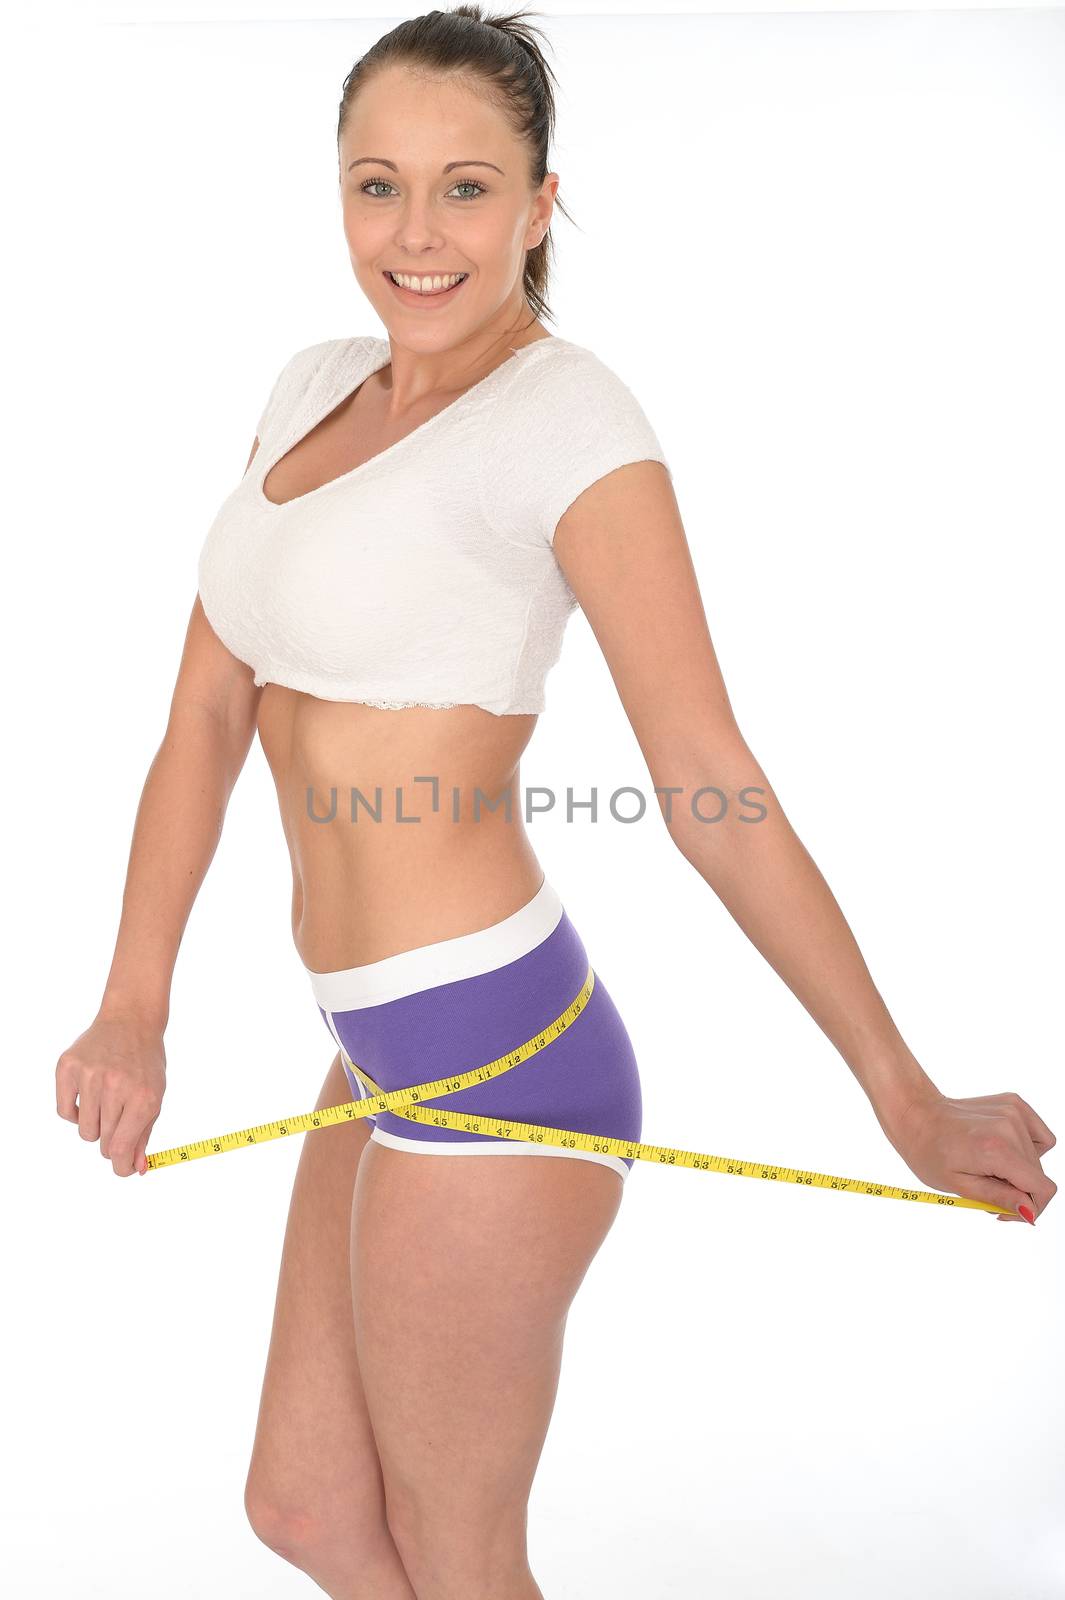 Healthy Young Woman Checking Her Weight Loss With a Tape Measure by Whiteboxmedia